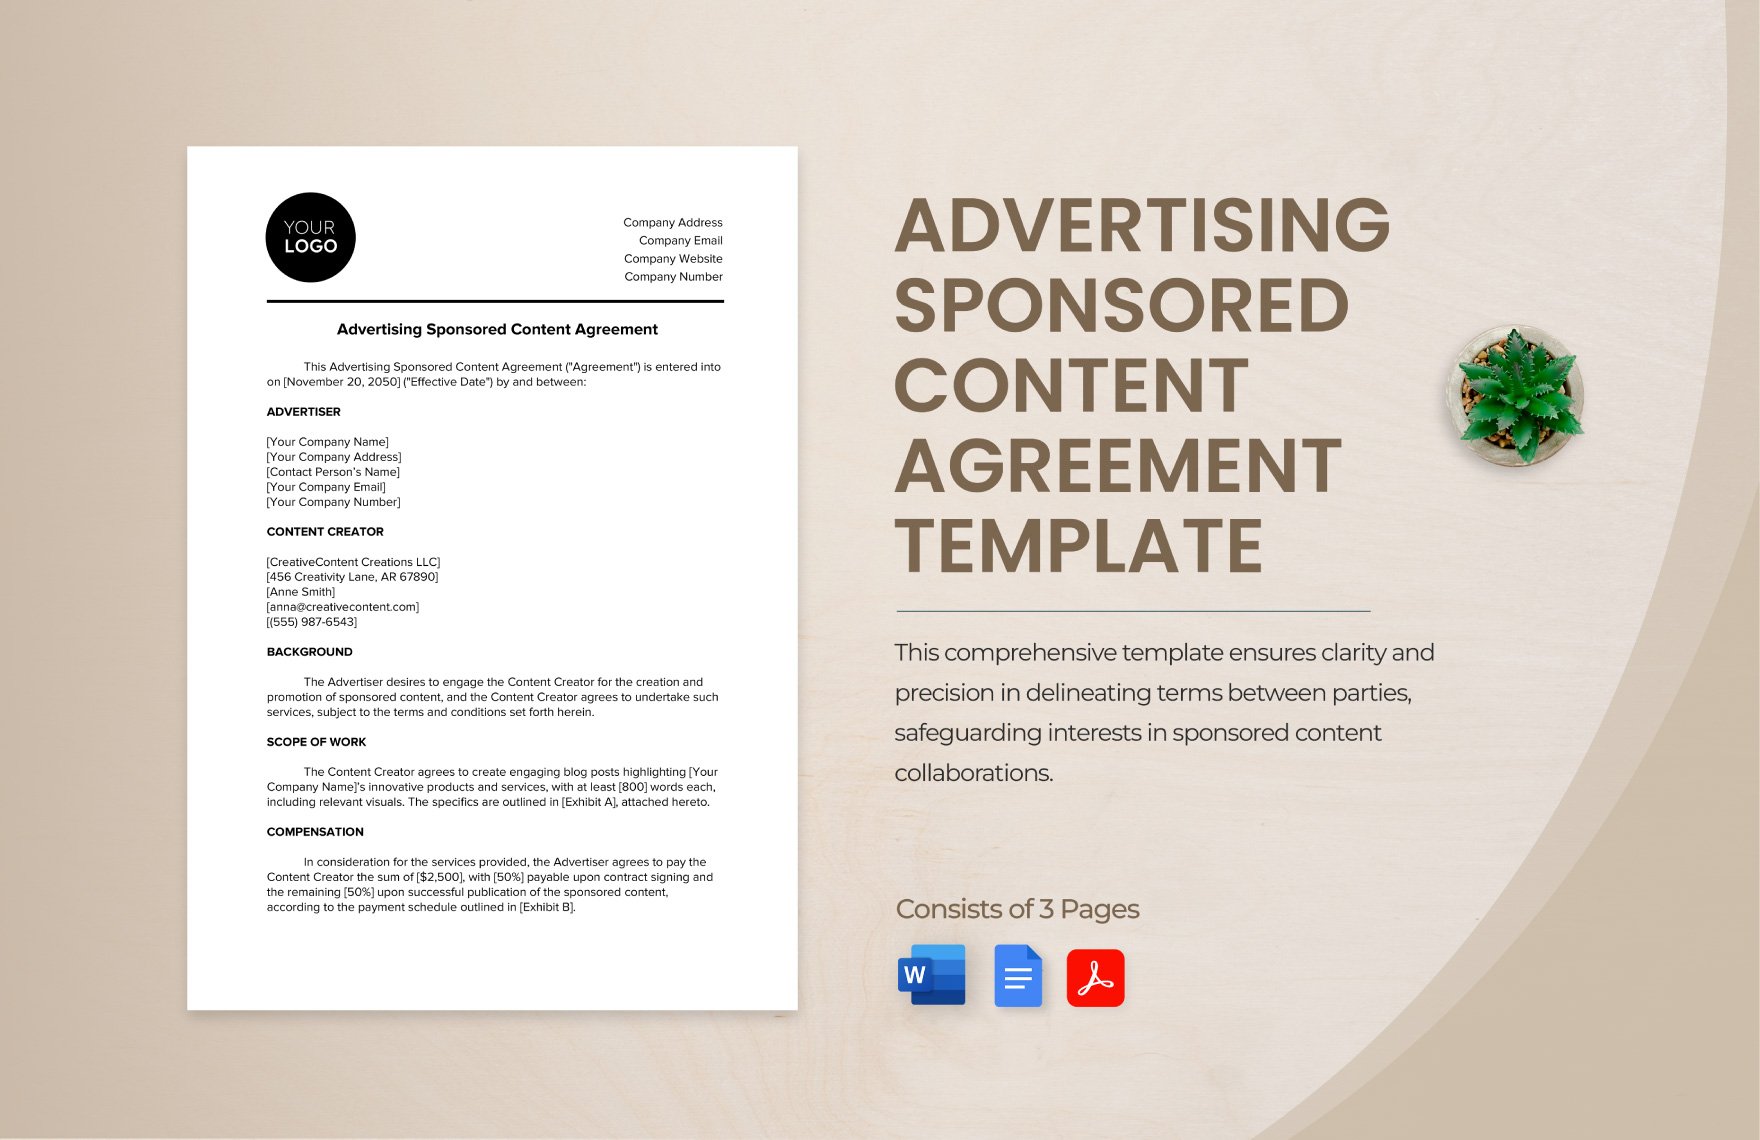 Advertising Sponsored Content Agreement Template in Word, Google Docs, PDF